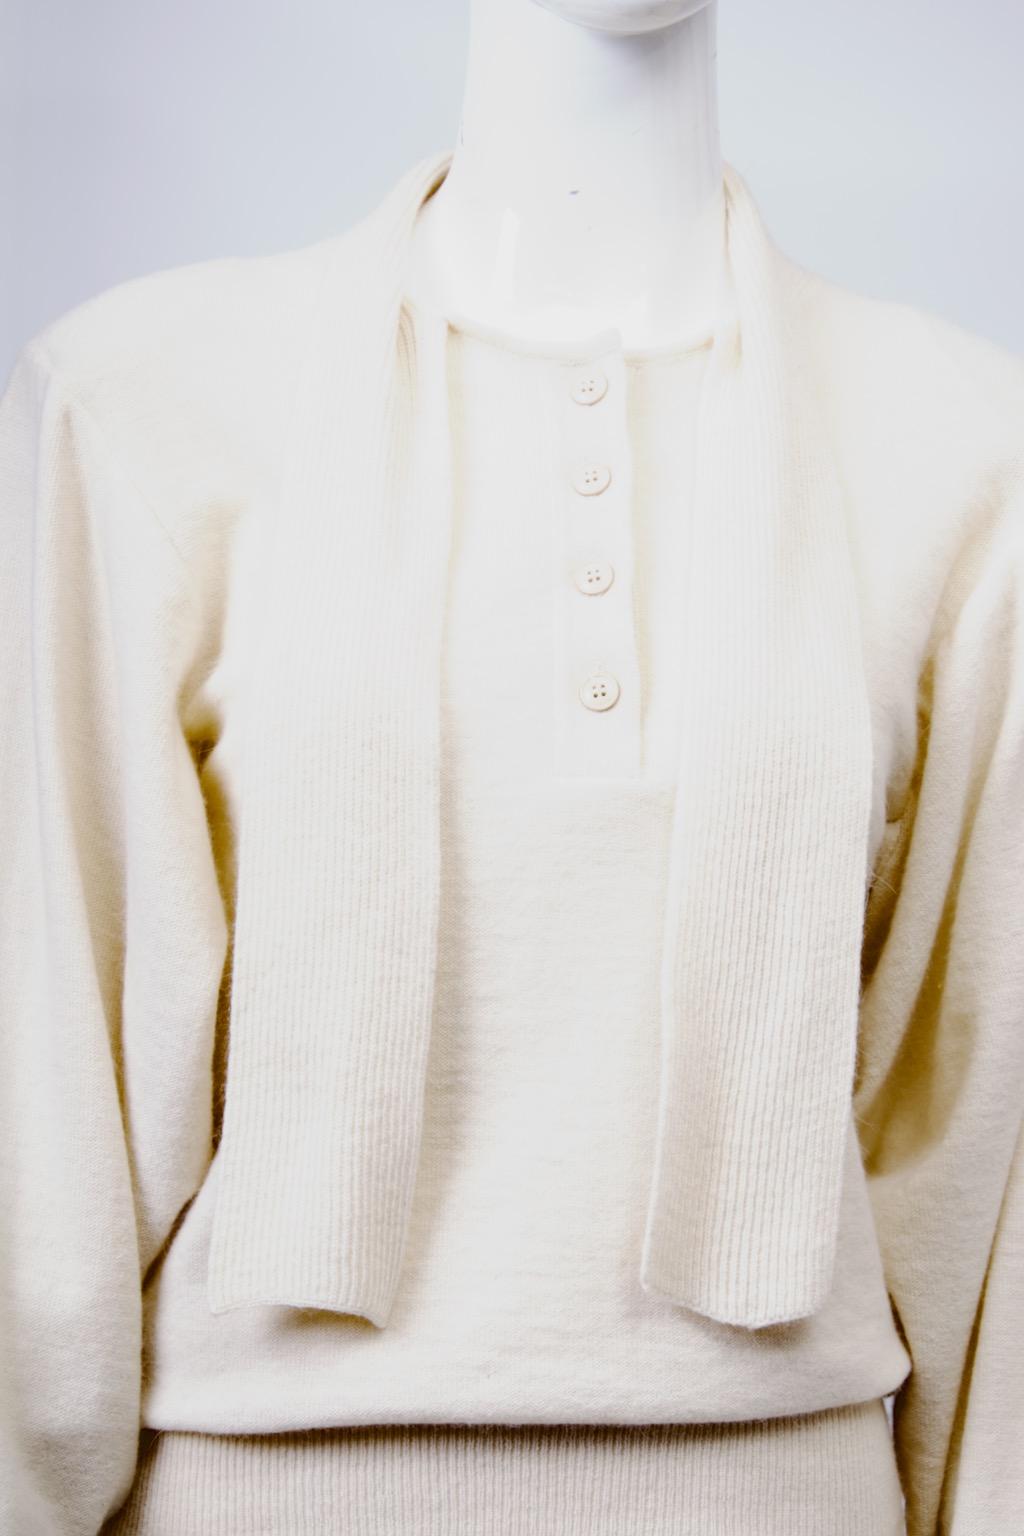 Sonia Rykiel Ivory Sweater and Skirt Ensemble For Sale 5